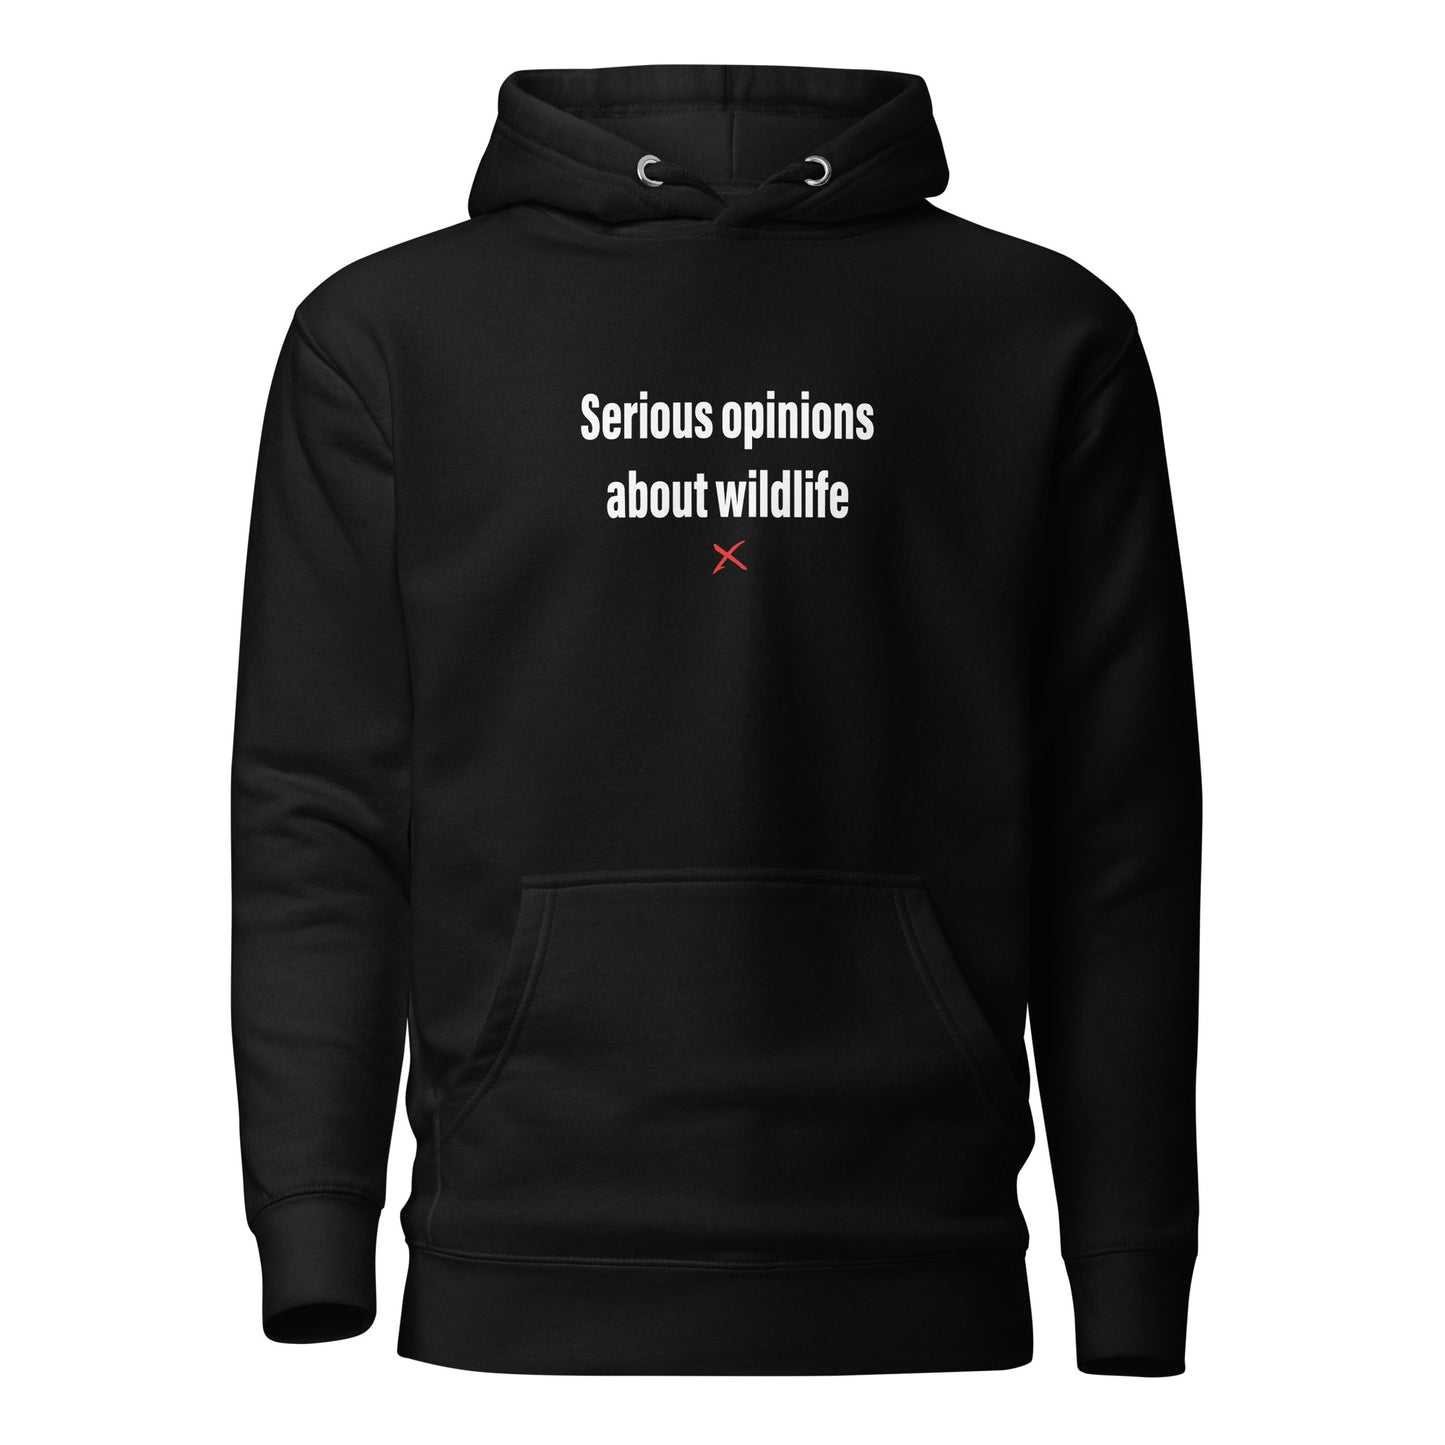 Serious opinions about wildlife - Hoodie